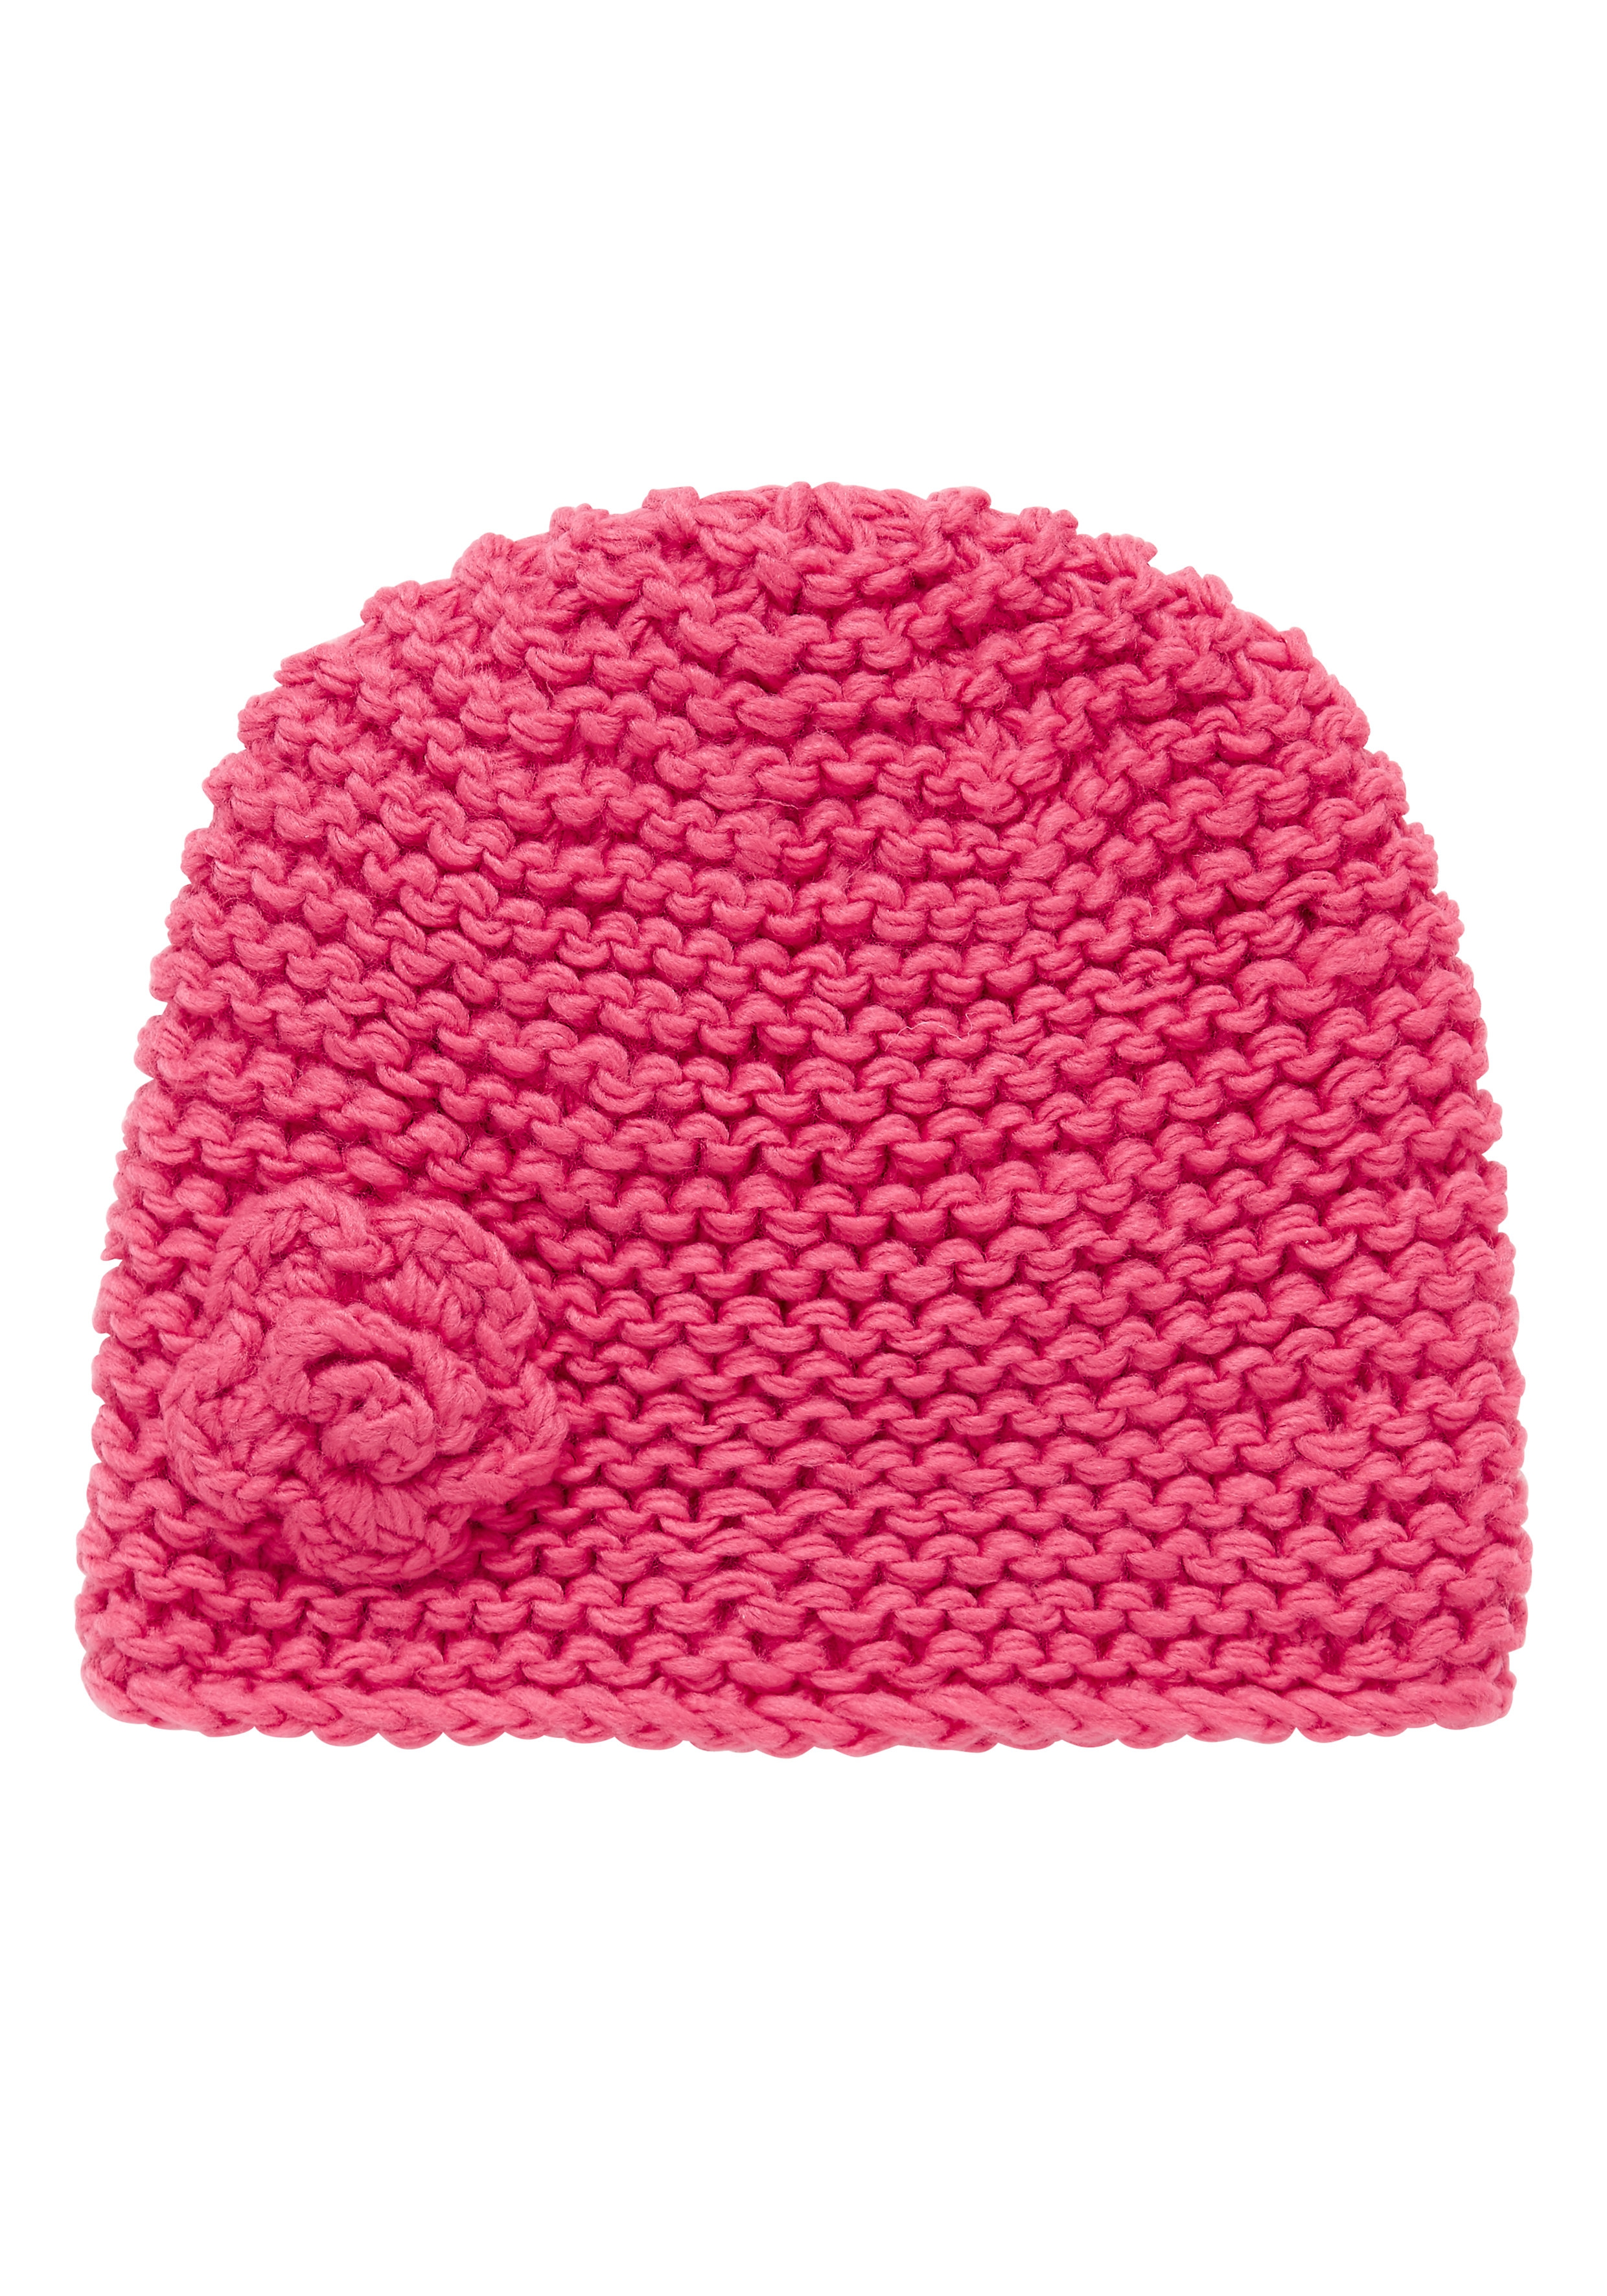 Mothercare | Girls Knitted Beanie Hat - Pink